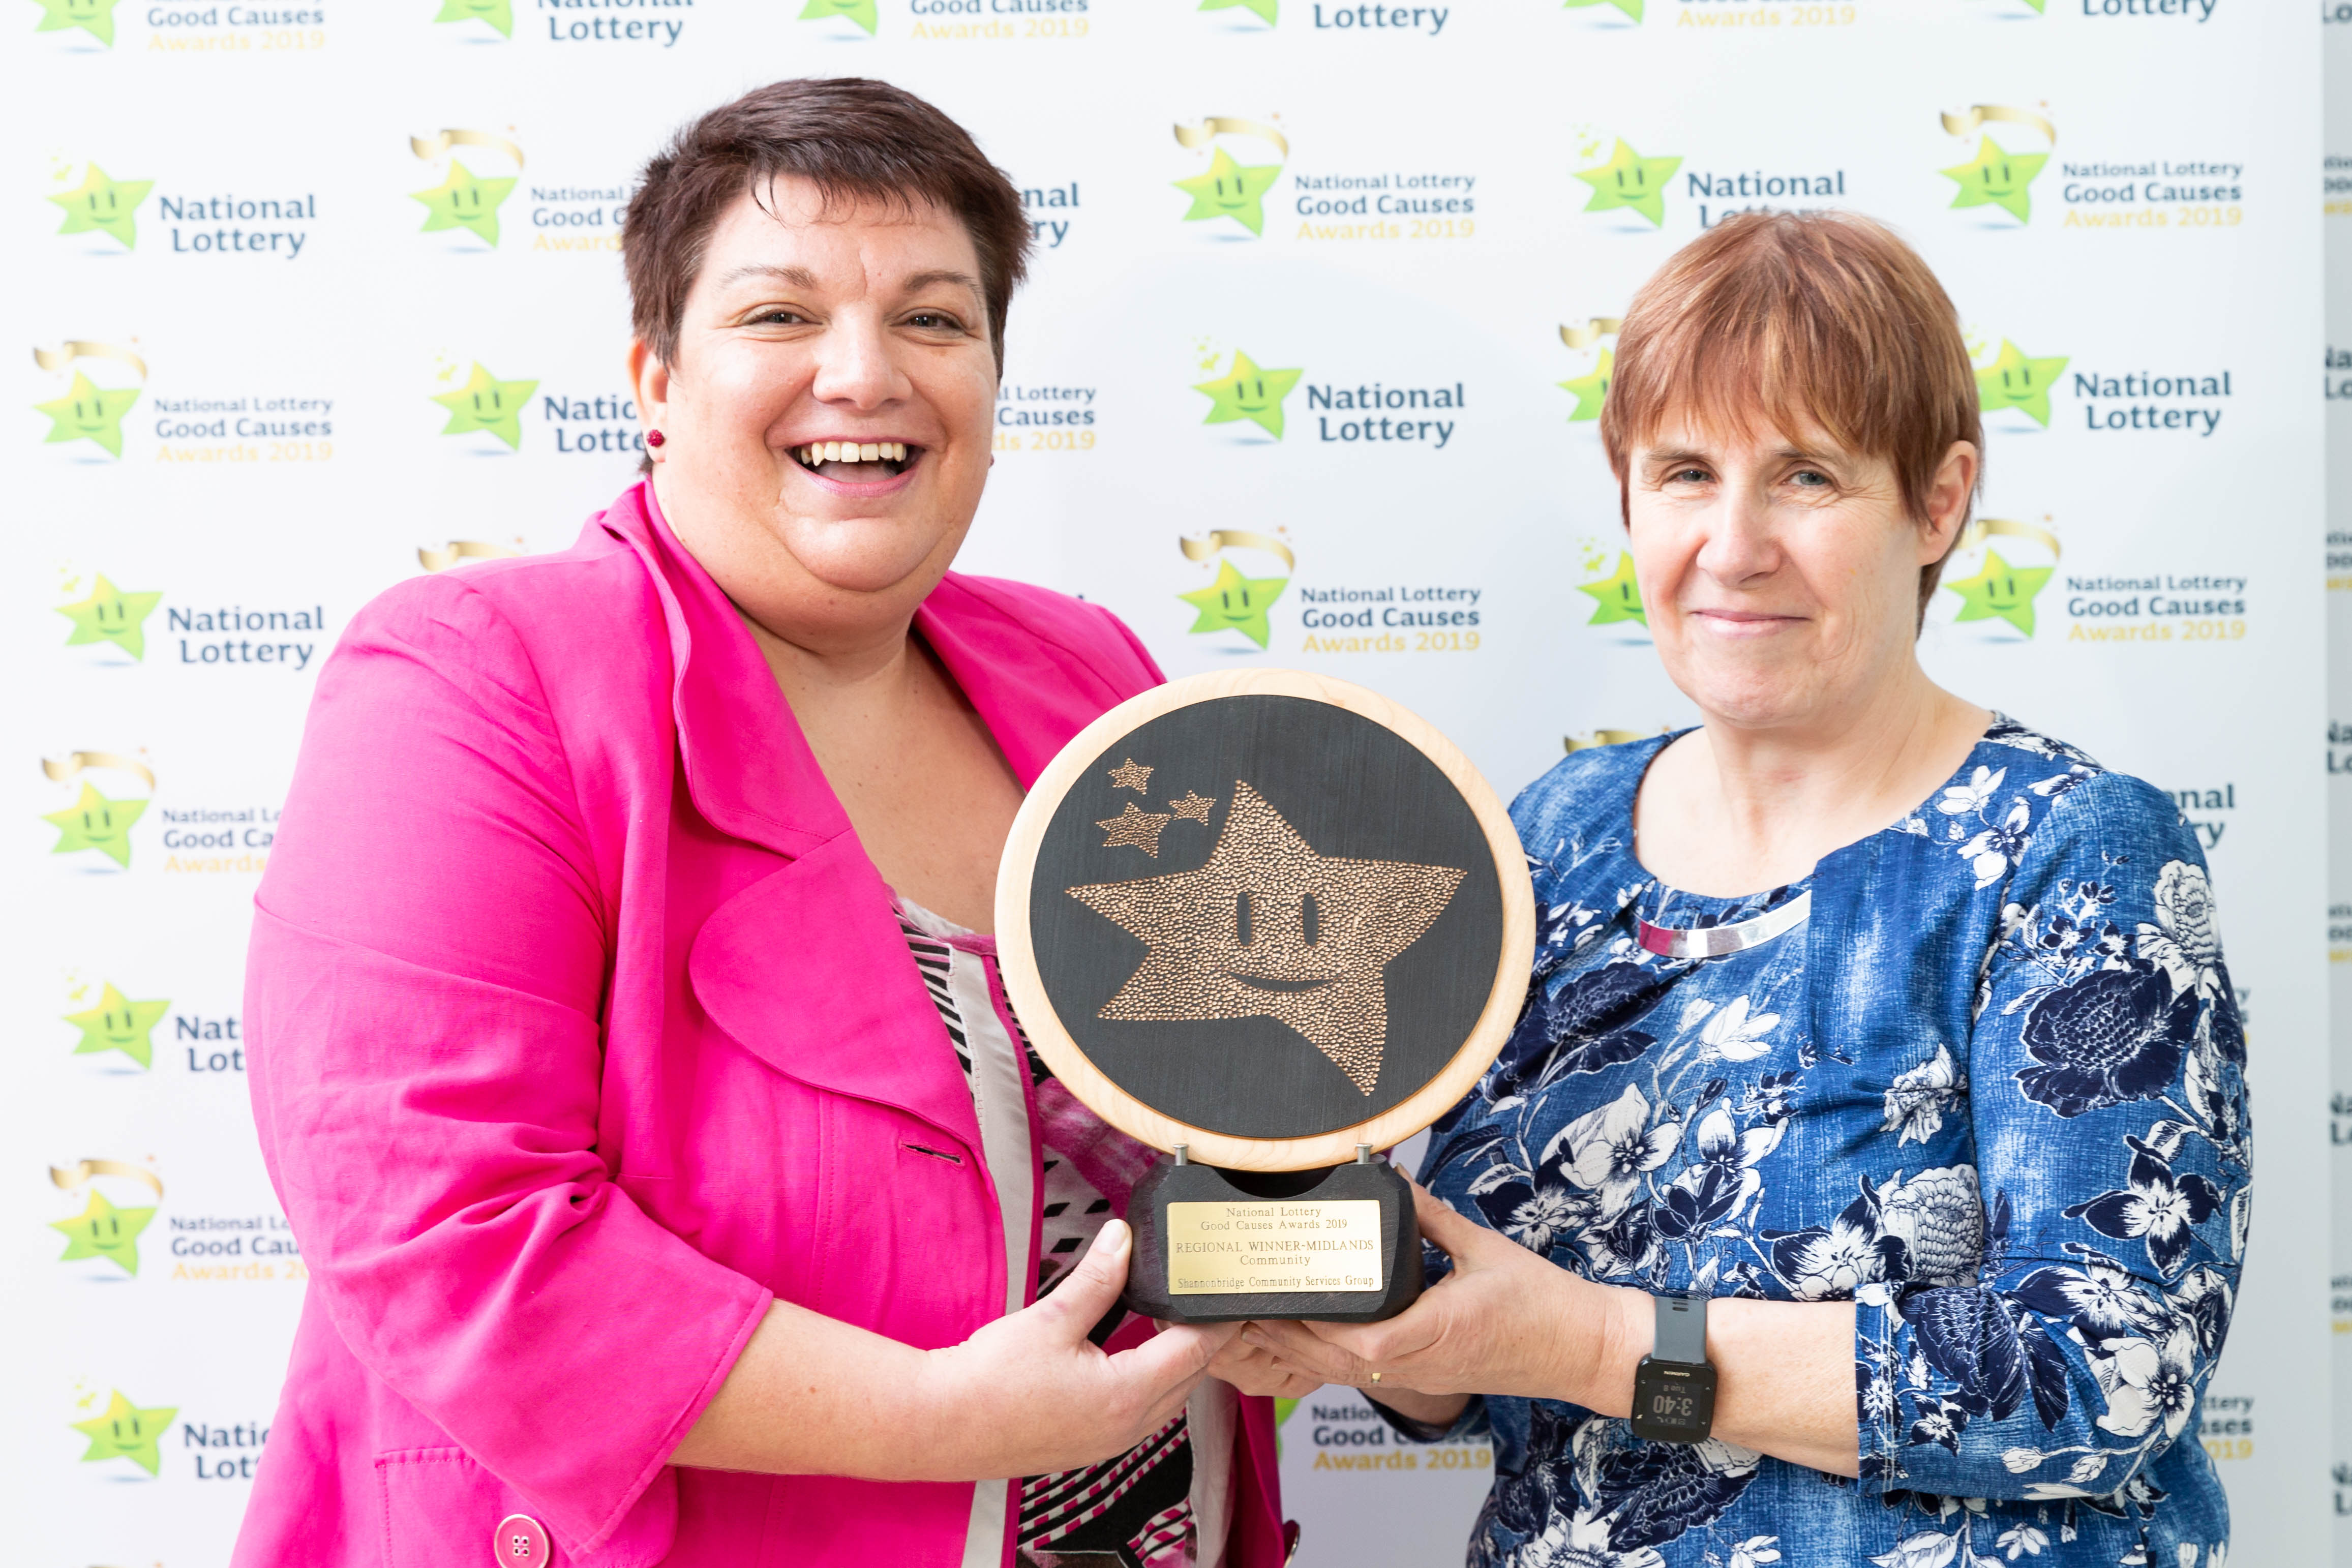 Offaly Community Services Group Ready for 2019 National Lottery Good Causes Awards